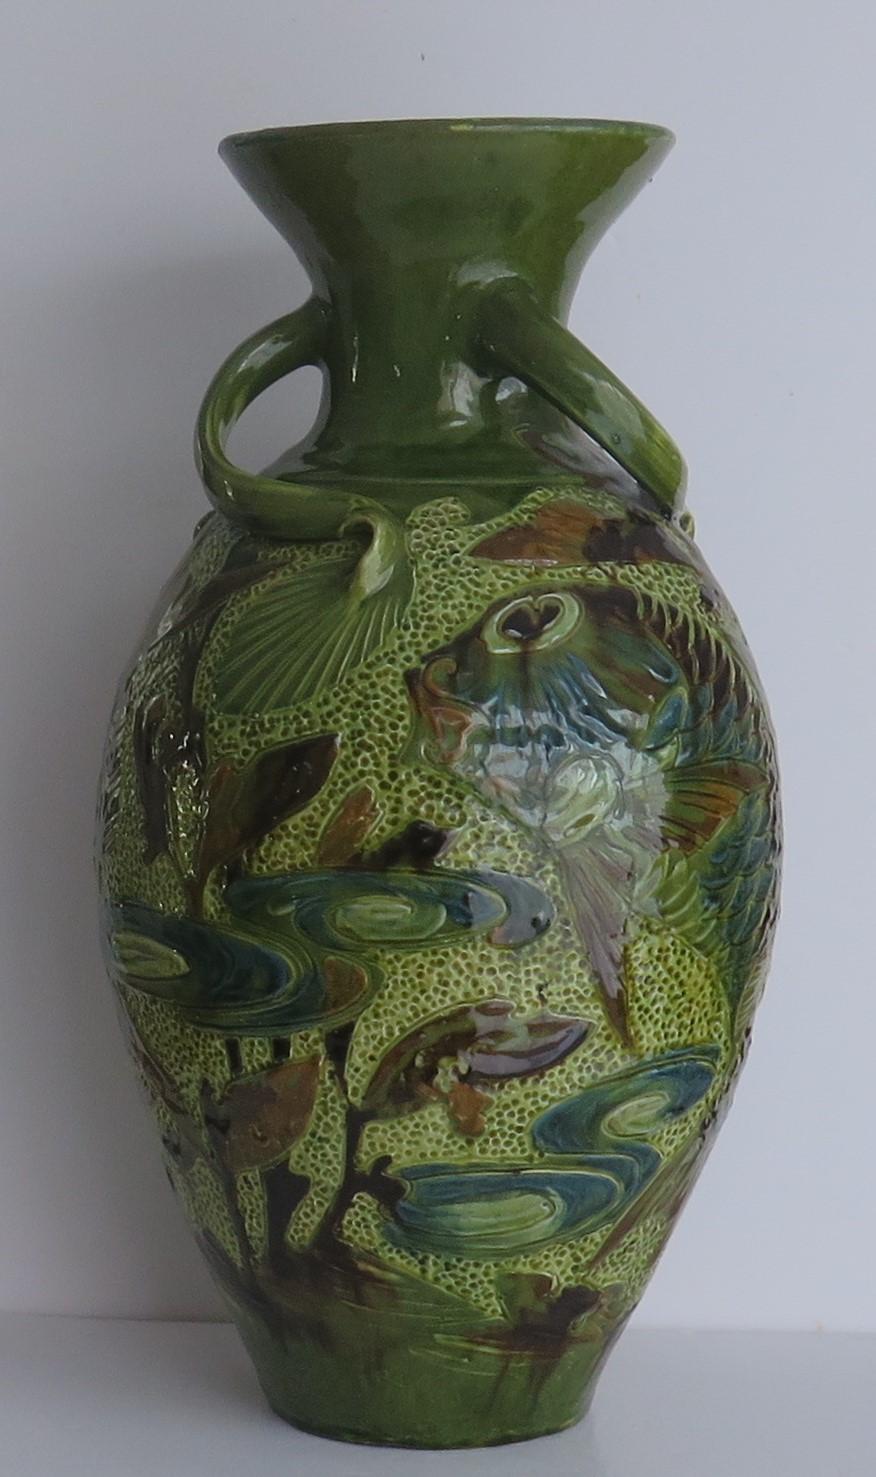 This is a large impressive Art Pottery Vase, with three angular handles, all hand modelled using the Sgraffito method, with Fish decoration, hand made by W L BARON of Barnstaple, Devon, England and dating to the Edwardian period, 1909.

This vase